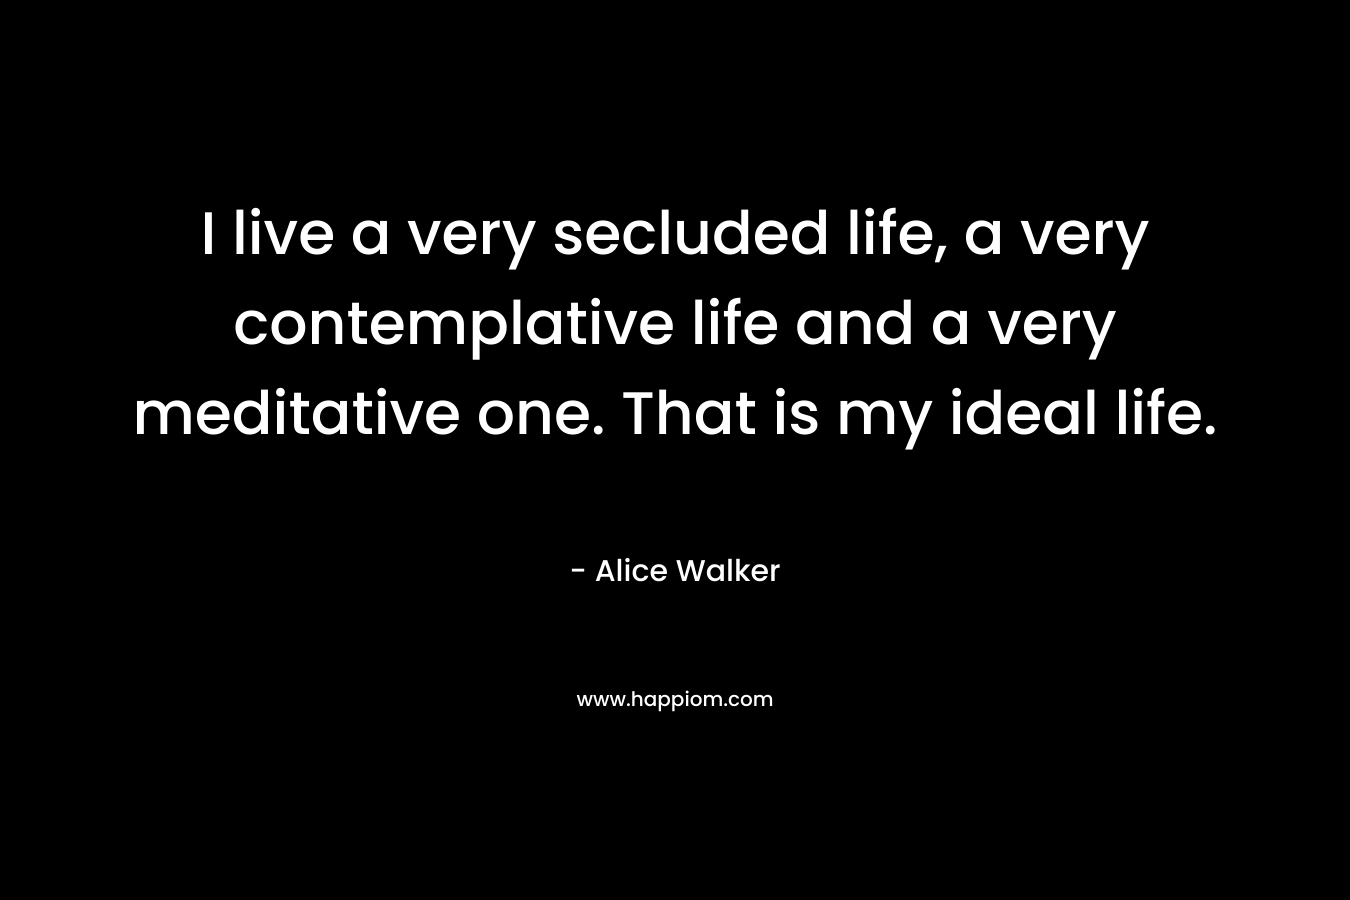 I live a very secluded life, a very contemplative life and a very meditative one. That is my ideal life. – Alice Walker